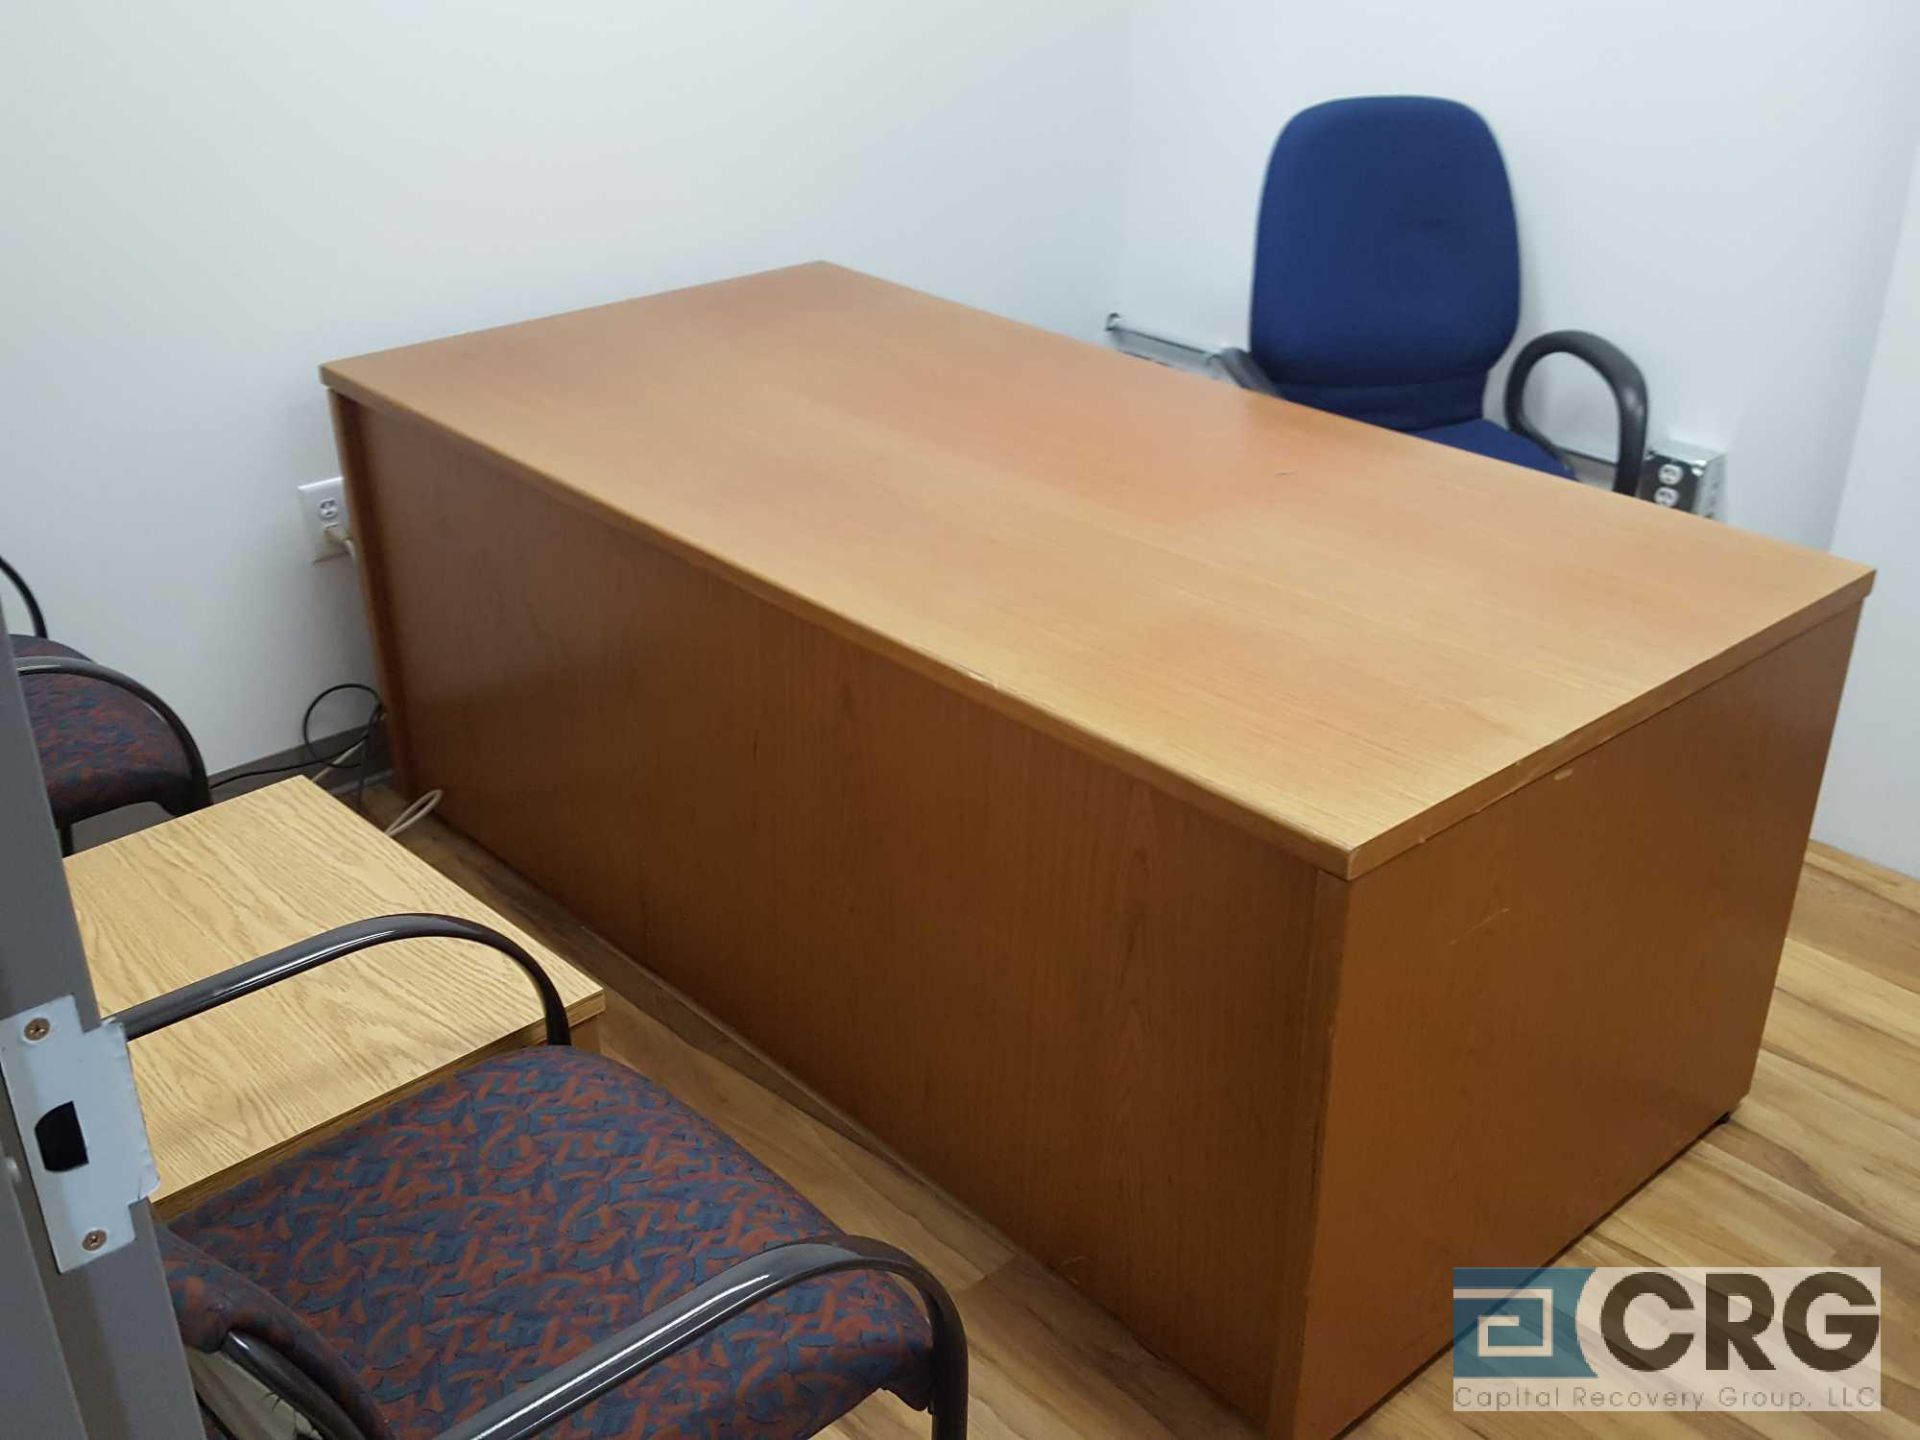 Lot of assorted office furnishings, in desks, credenzas, chairs, bookcases, etc. Excludes any with